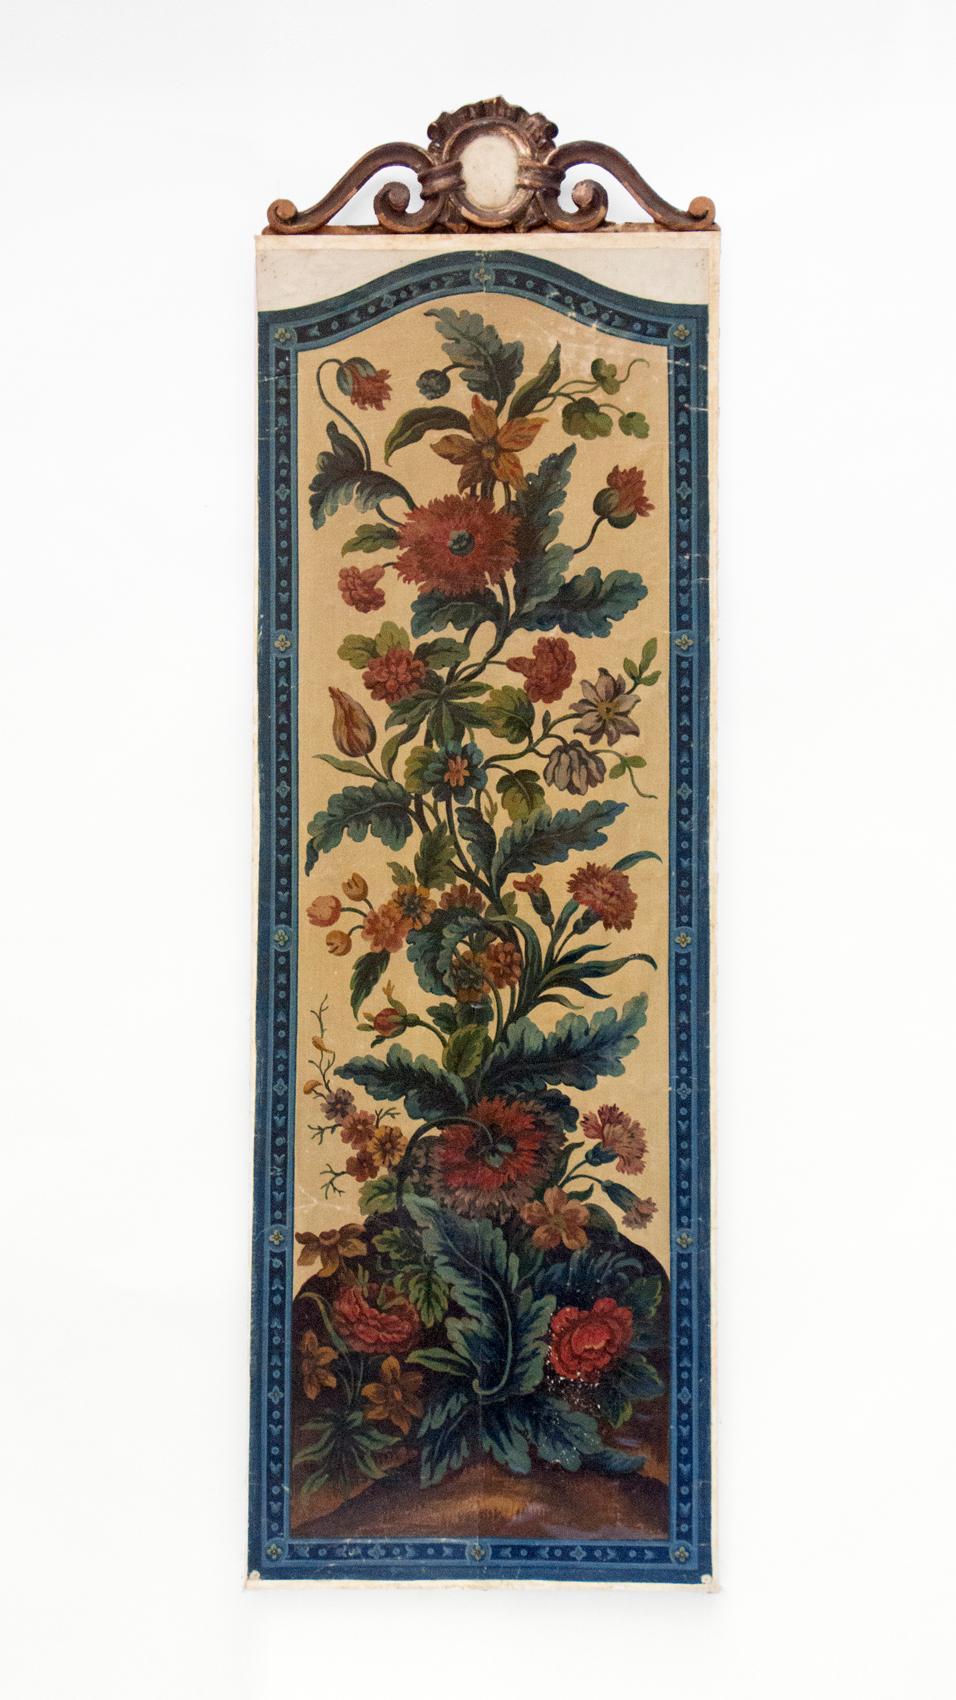 18th century French Aubusson floral painting framed with an 18th century French fragment.

The oil painting original comes from France and is painted with a Aubusson-tapestry floral design with deep red and green hues. The history of Aubusson